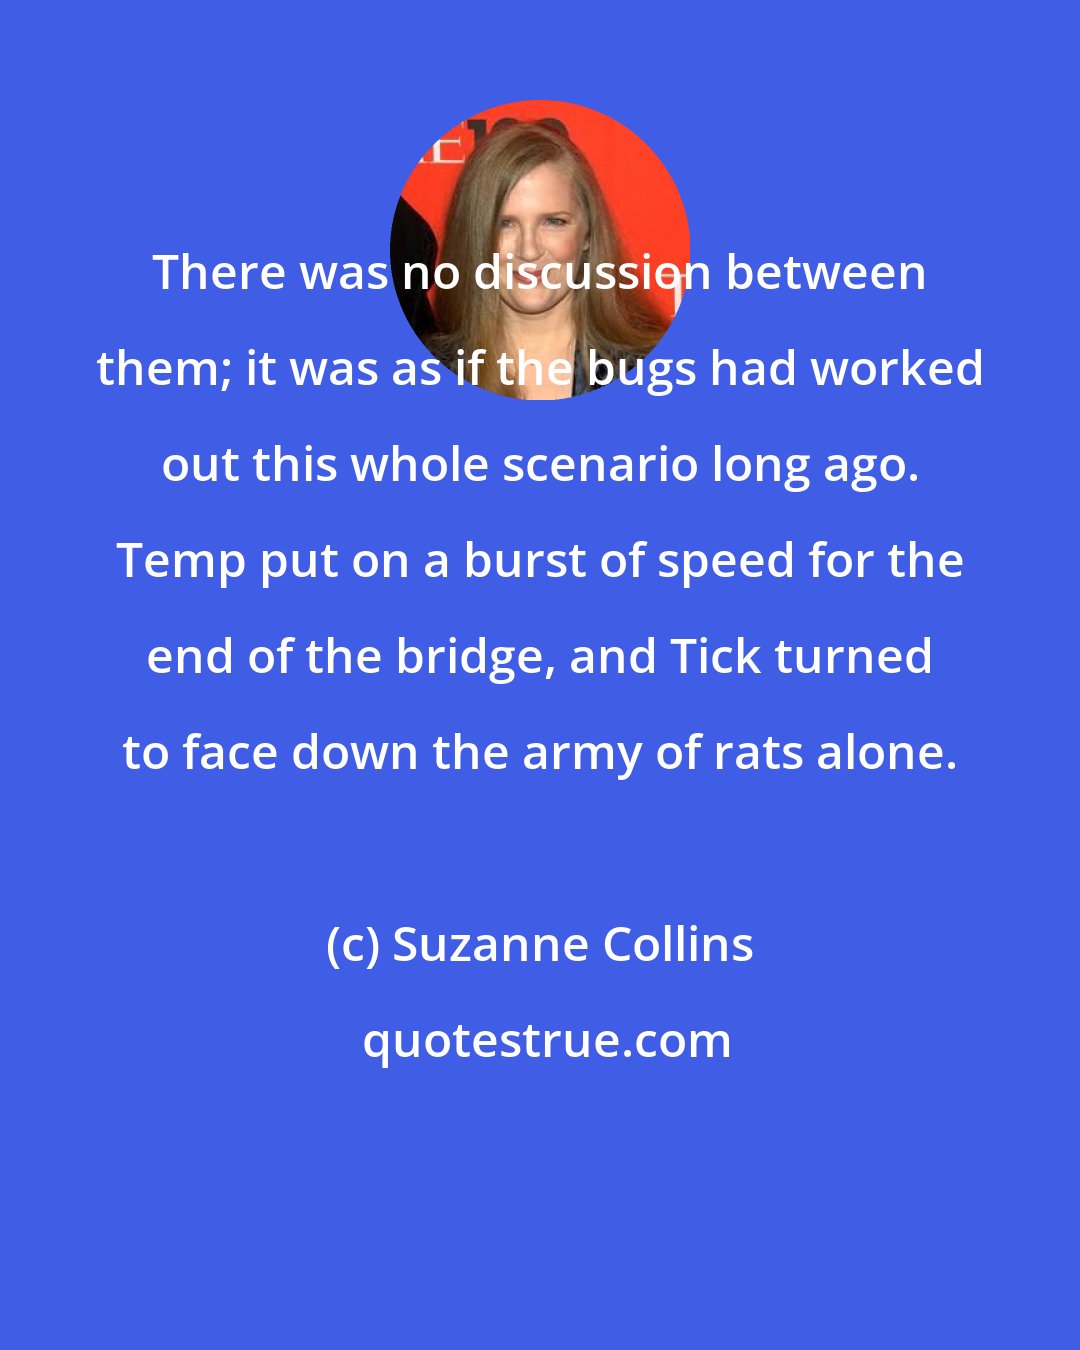 Suzanne Collins: There was no discussion between them; it was as if the bugs had worked out this whole scenario long ago. Temp put on a burst of speed for the end of the bridge, and Tick turned to face down the army of rats alone.